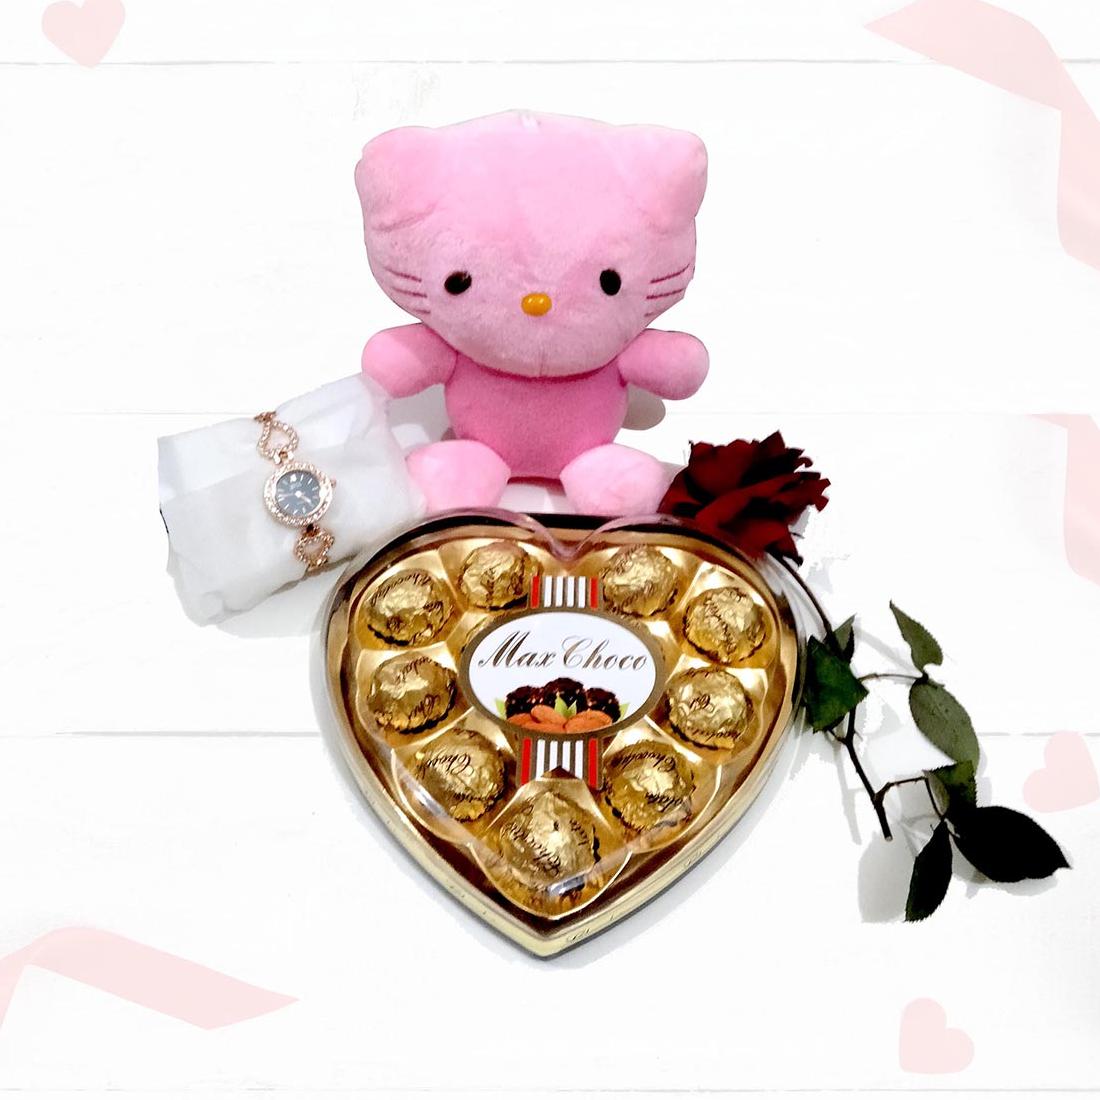 Hart-Shape-Chocolate-with-a-small-teddy-and-a-rose-1229-jpg-suptadhara-product-1711627987.jpg